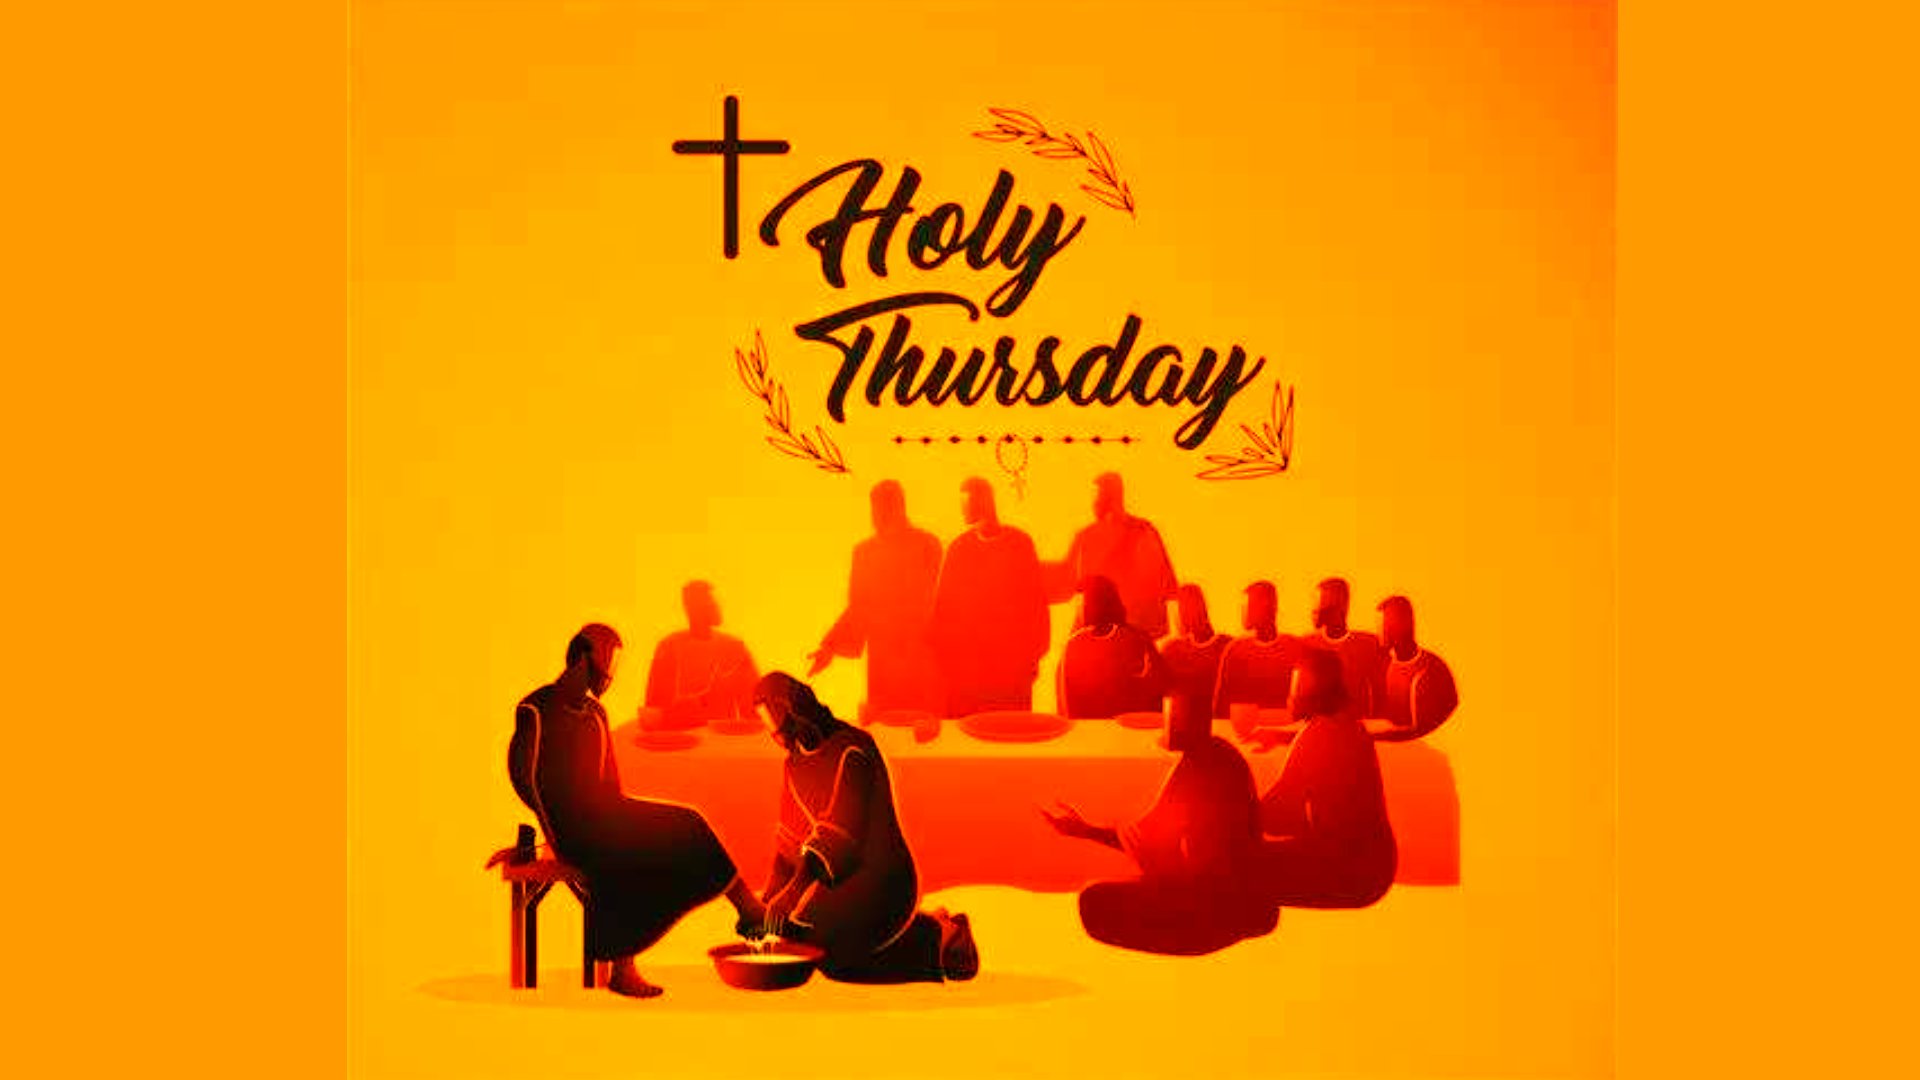 Best 57+ Heartwarming Happy Maundy Thursday Quotes, Wishes, and Greetings to Spread Love and Blessings